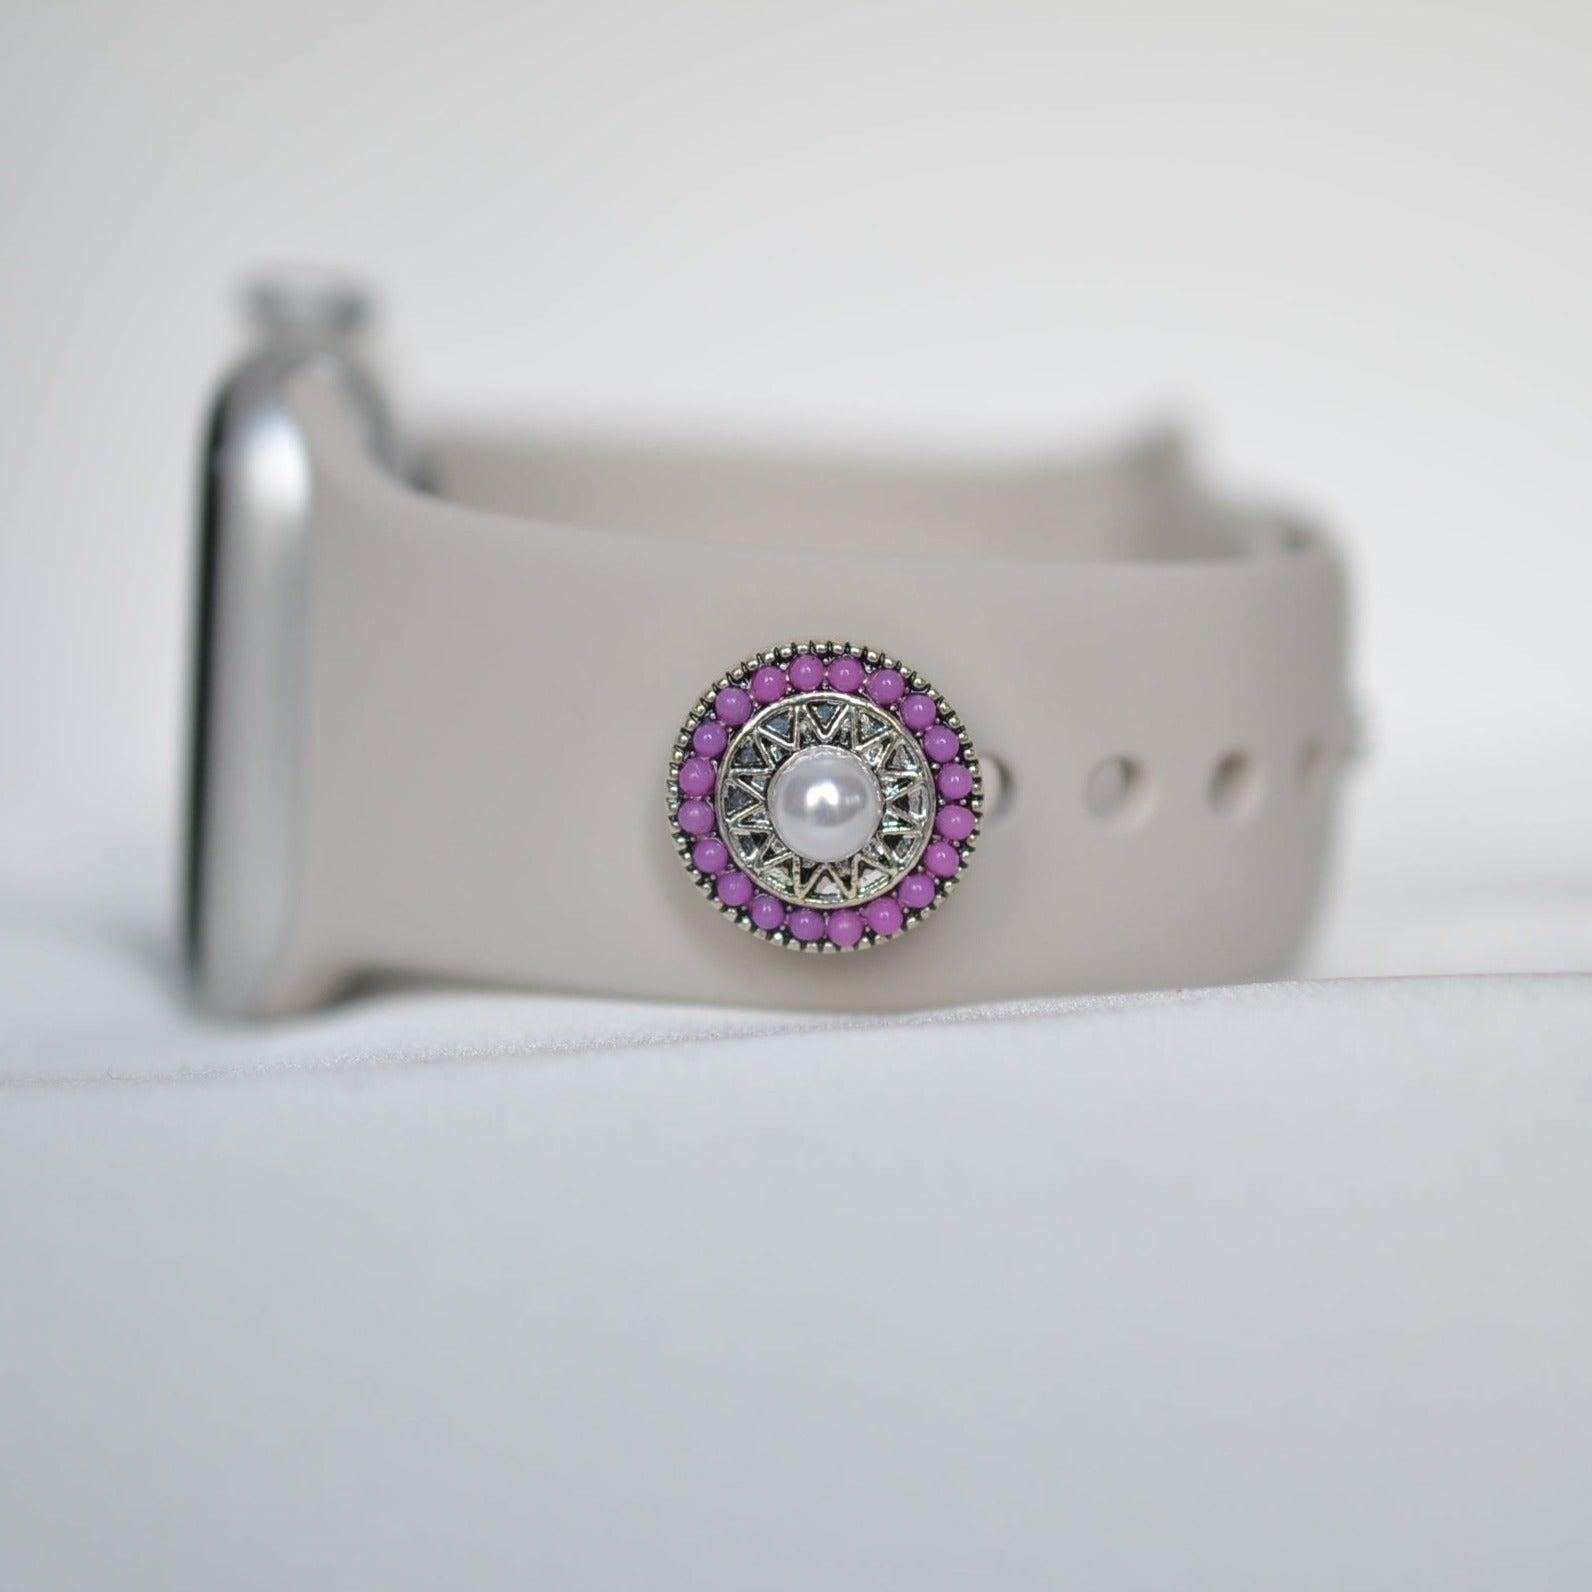 Purple Stones with Center Pearl Charm for belts, bags and watch band charms